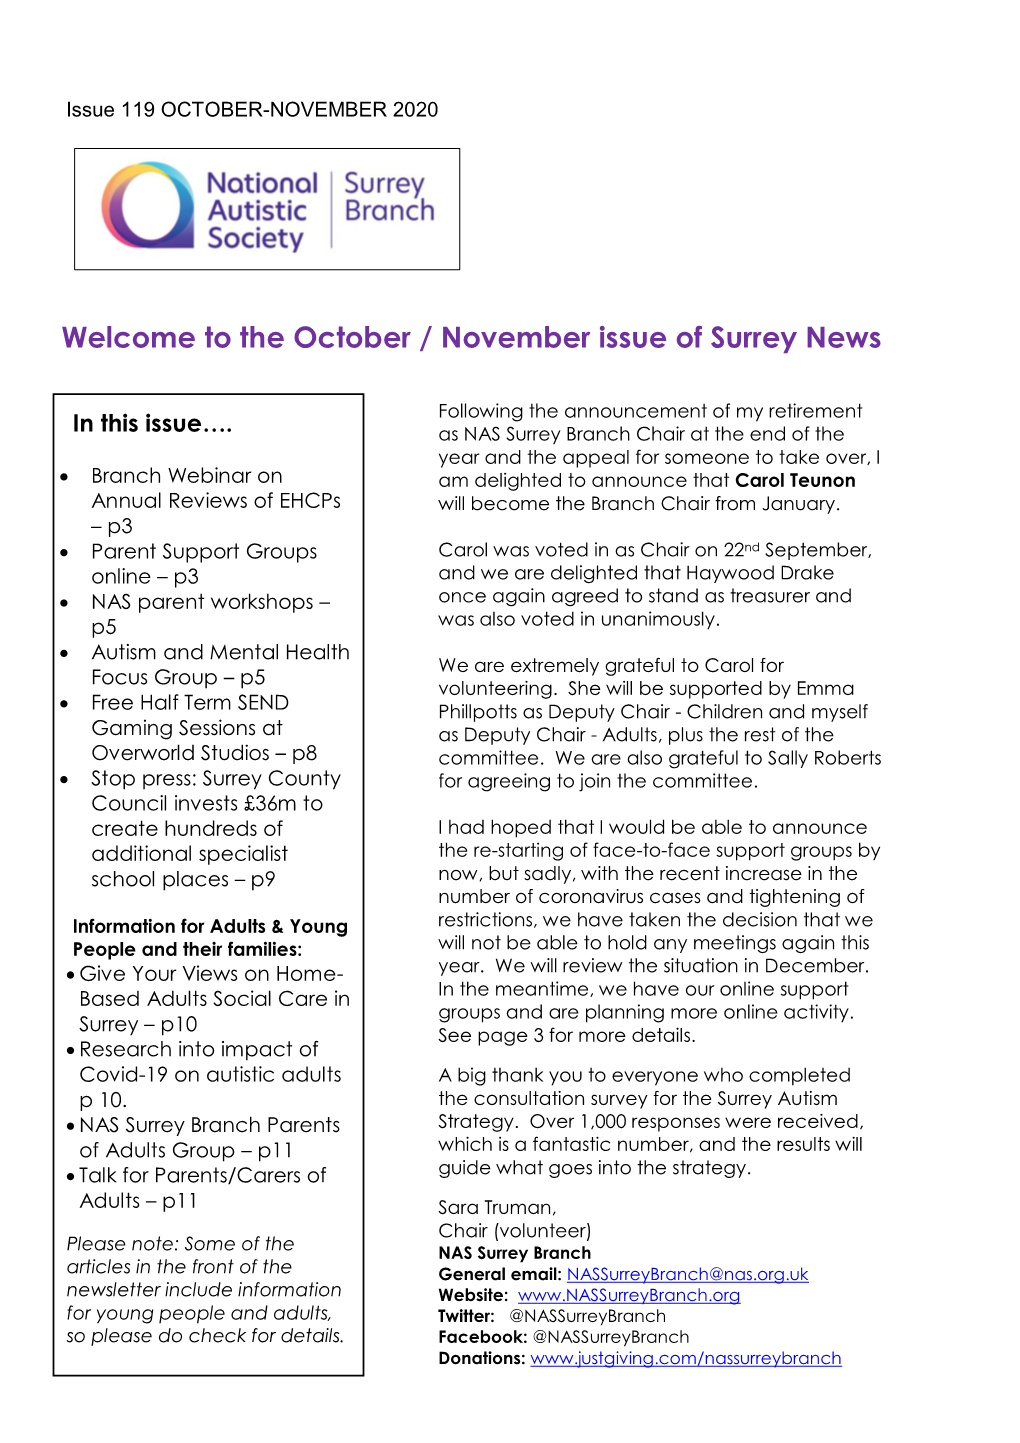 The October / November Issue of Surrey News